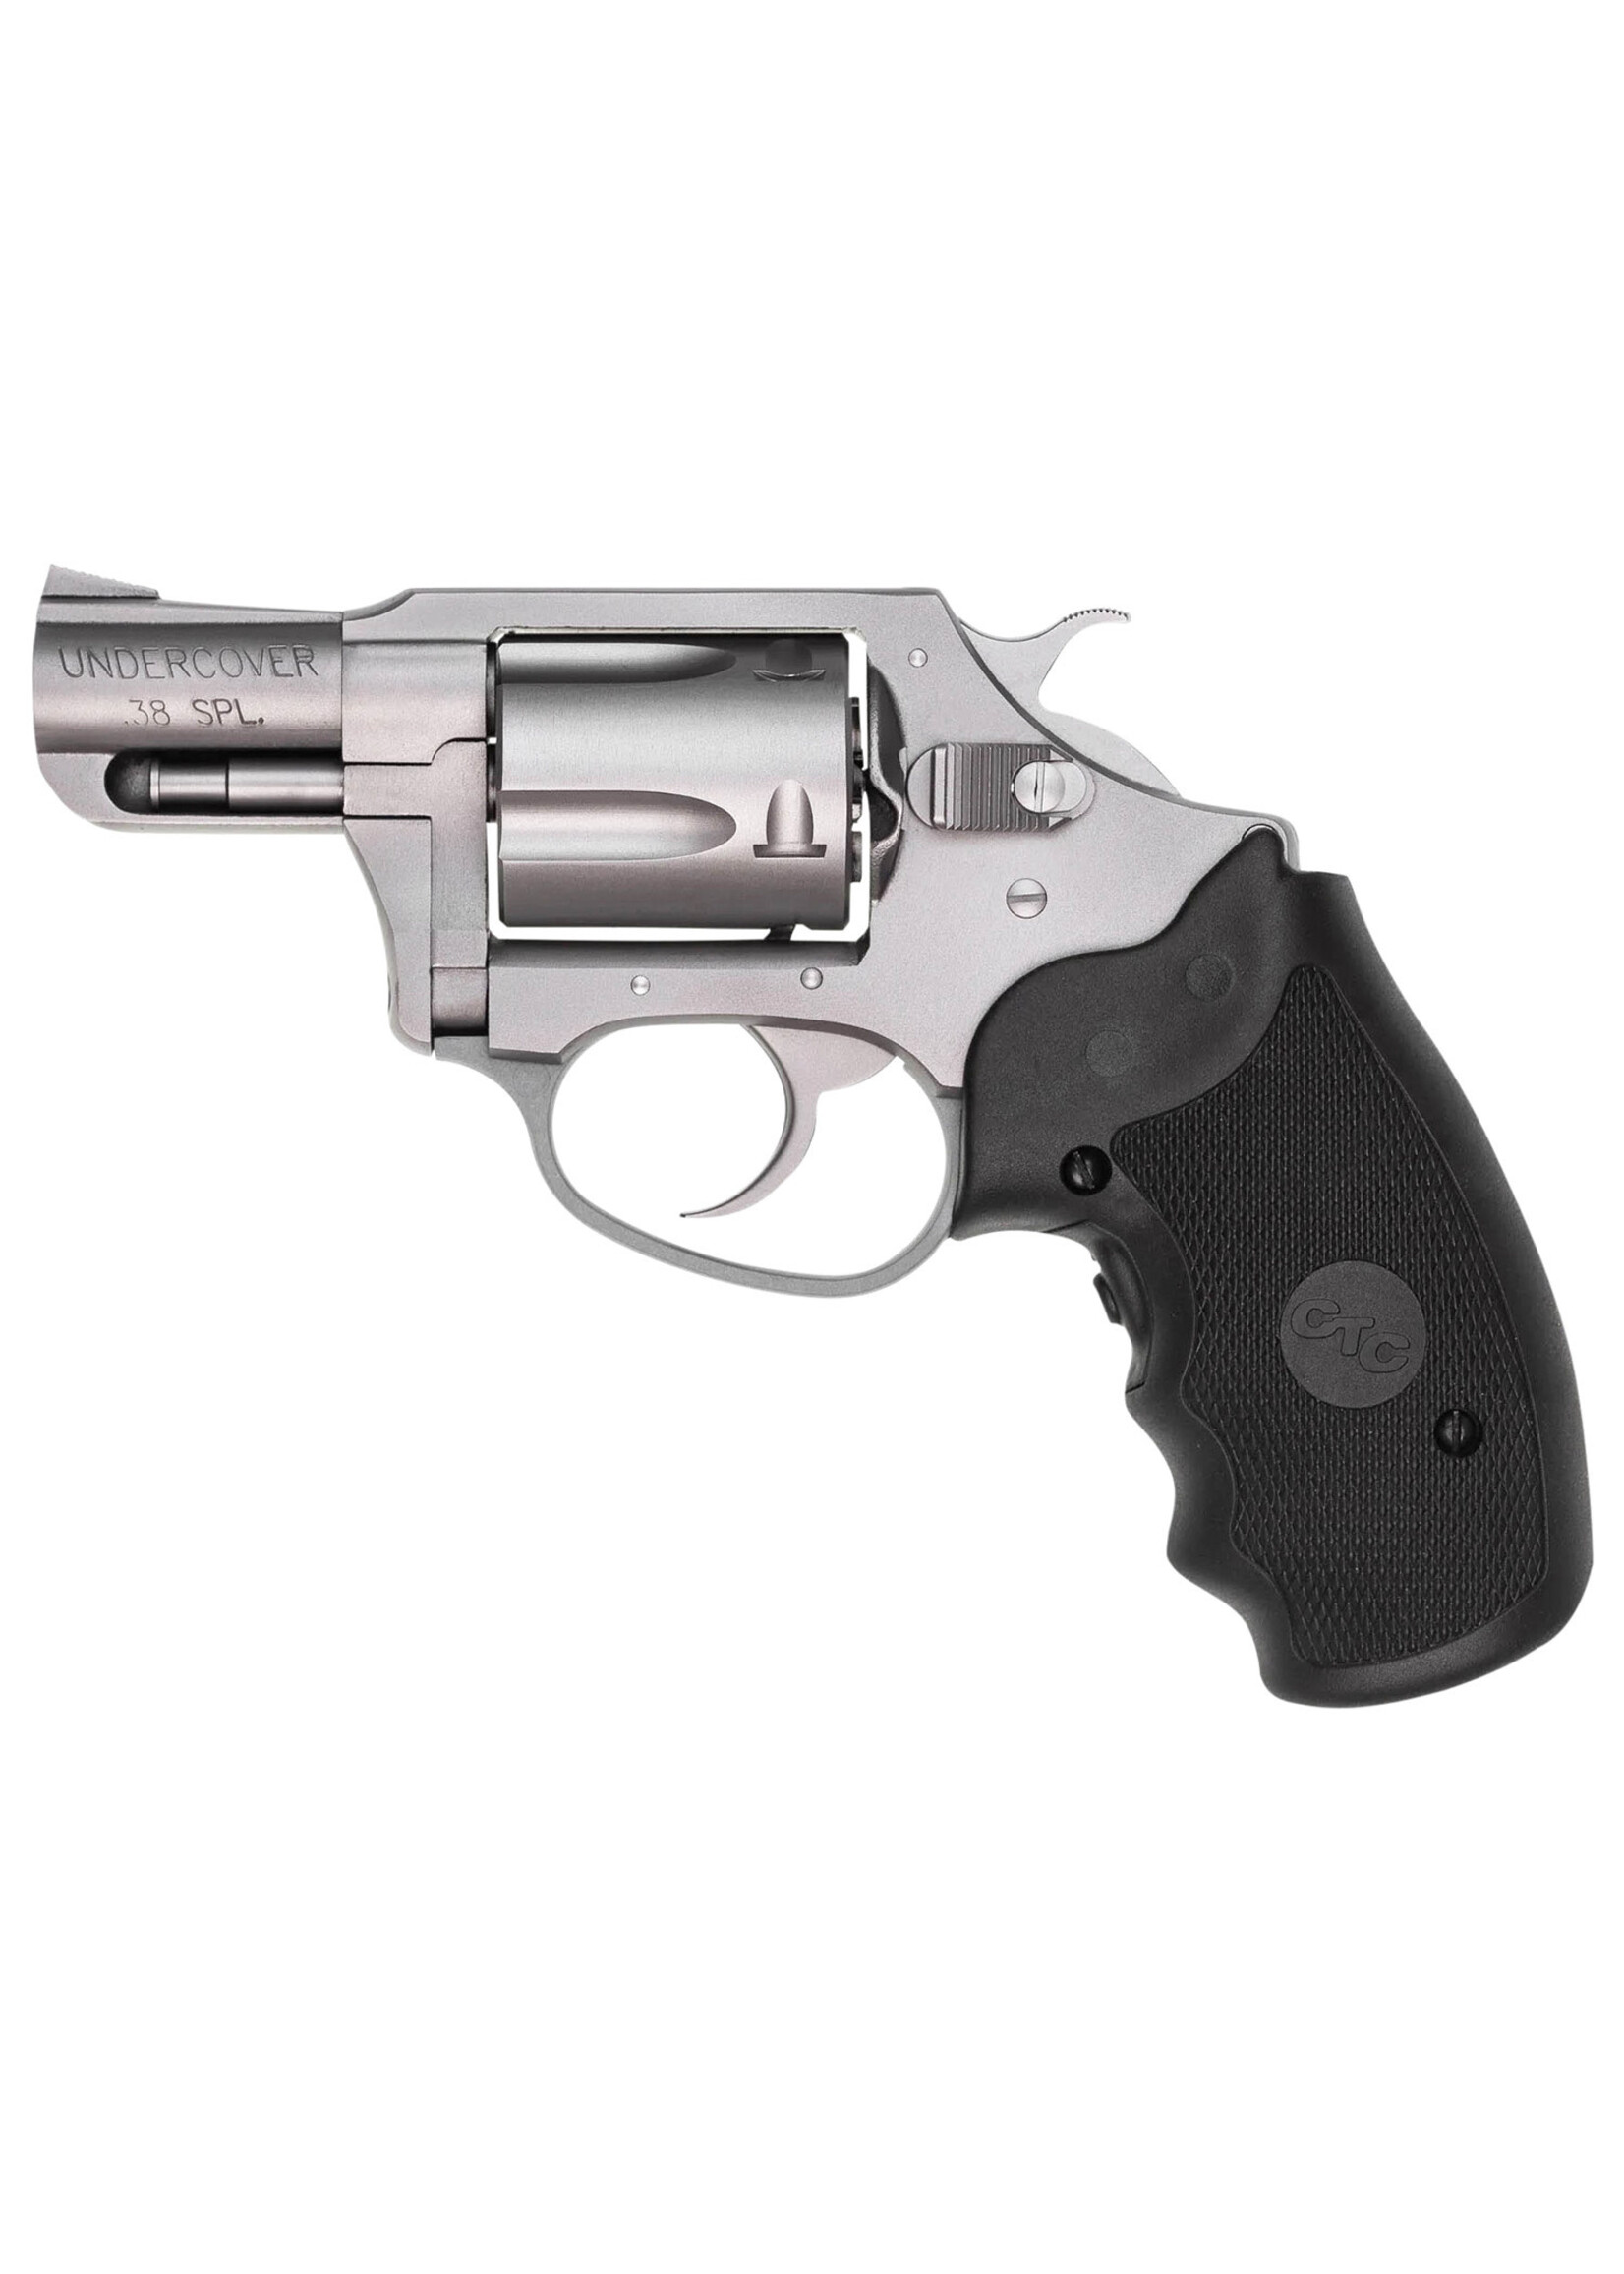 Charter Arms Charter Arms 73824 Undercover 38 Special 5rd 2" Matte Stainless Finished Barrel/Cylinder, Aluminum Frame w/Matte Stainless Finish, Standard Hammer, Finger Grooved Black Rubber Grip, Includes Crimson Trace Laser